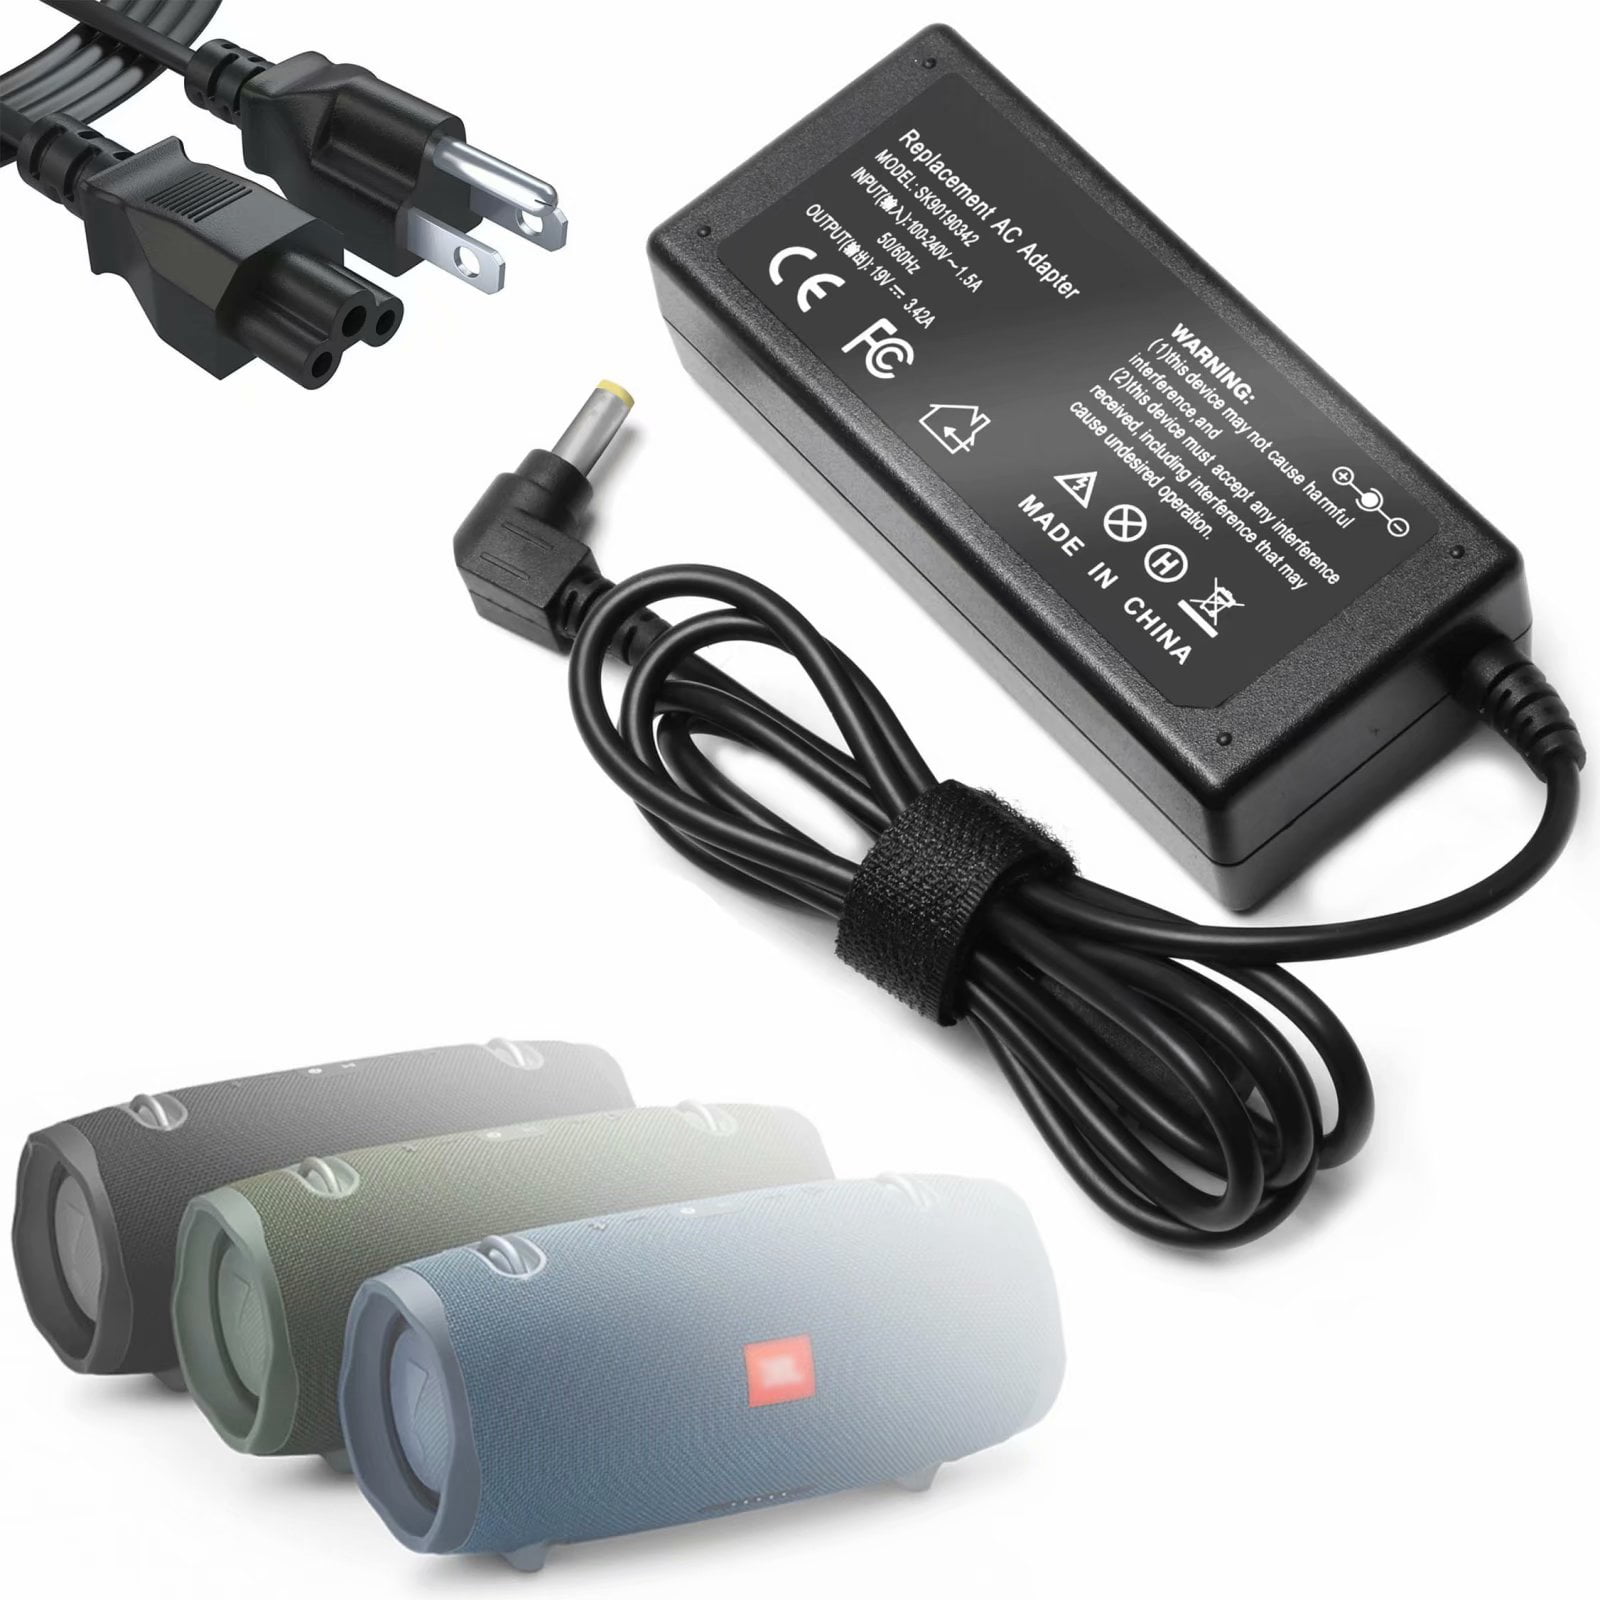 AC Adapter for JBL Xtreme, Xtreme 2 Portable Wireless Speaker Power Supply Adaptor Charger JBLXTREMEBLUUS NSA60ED-190300 - Walmart.com